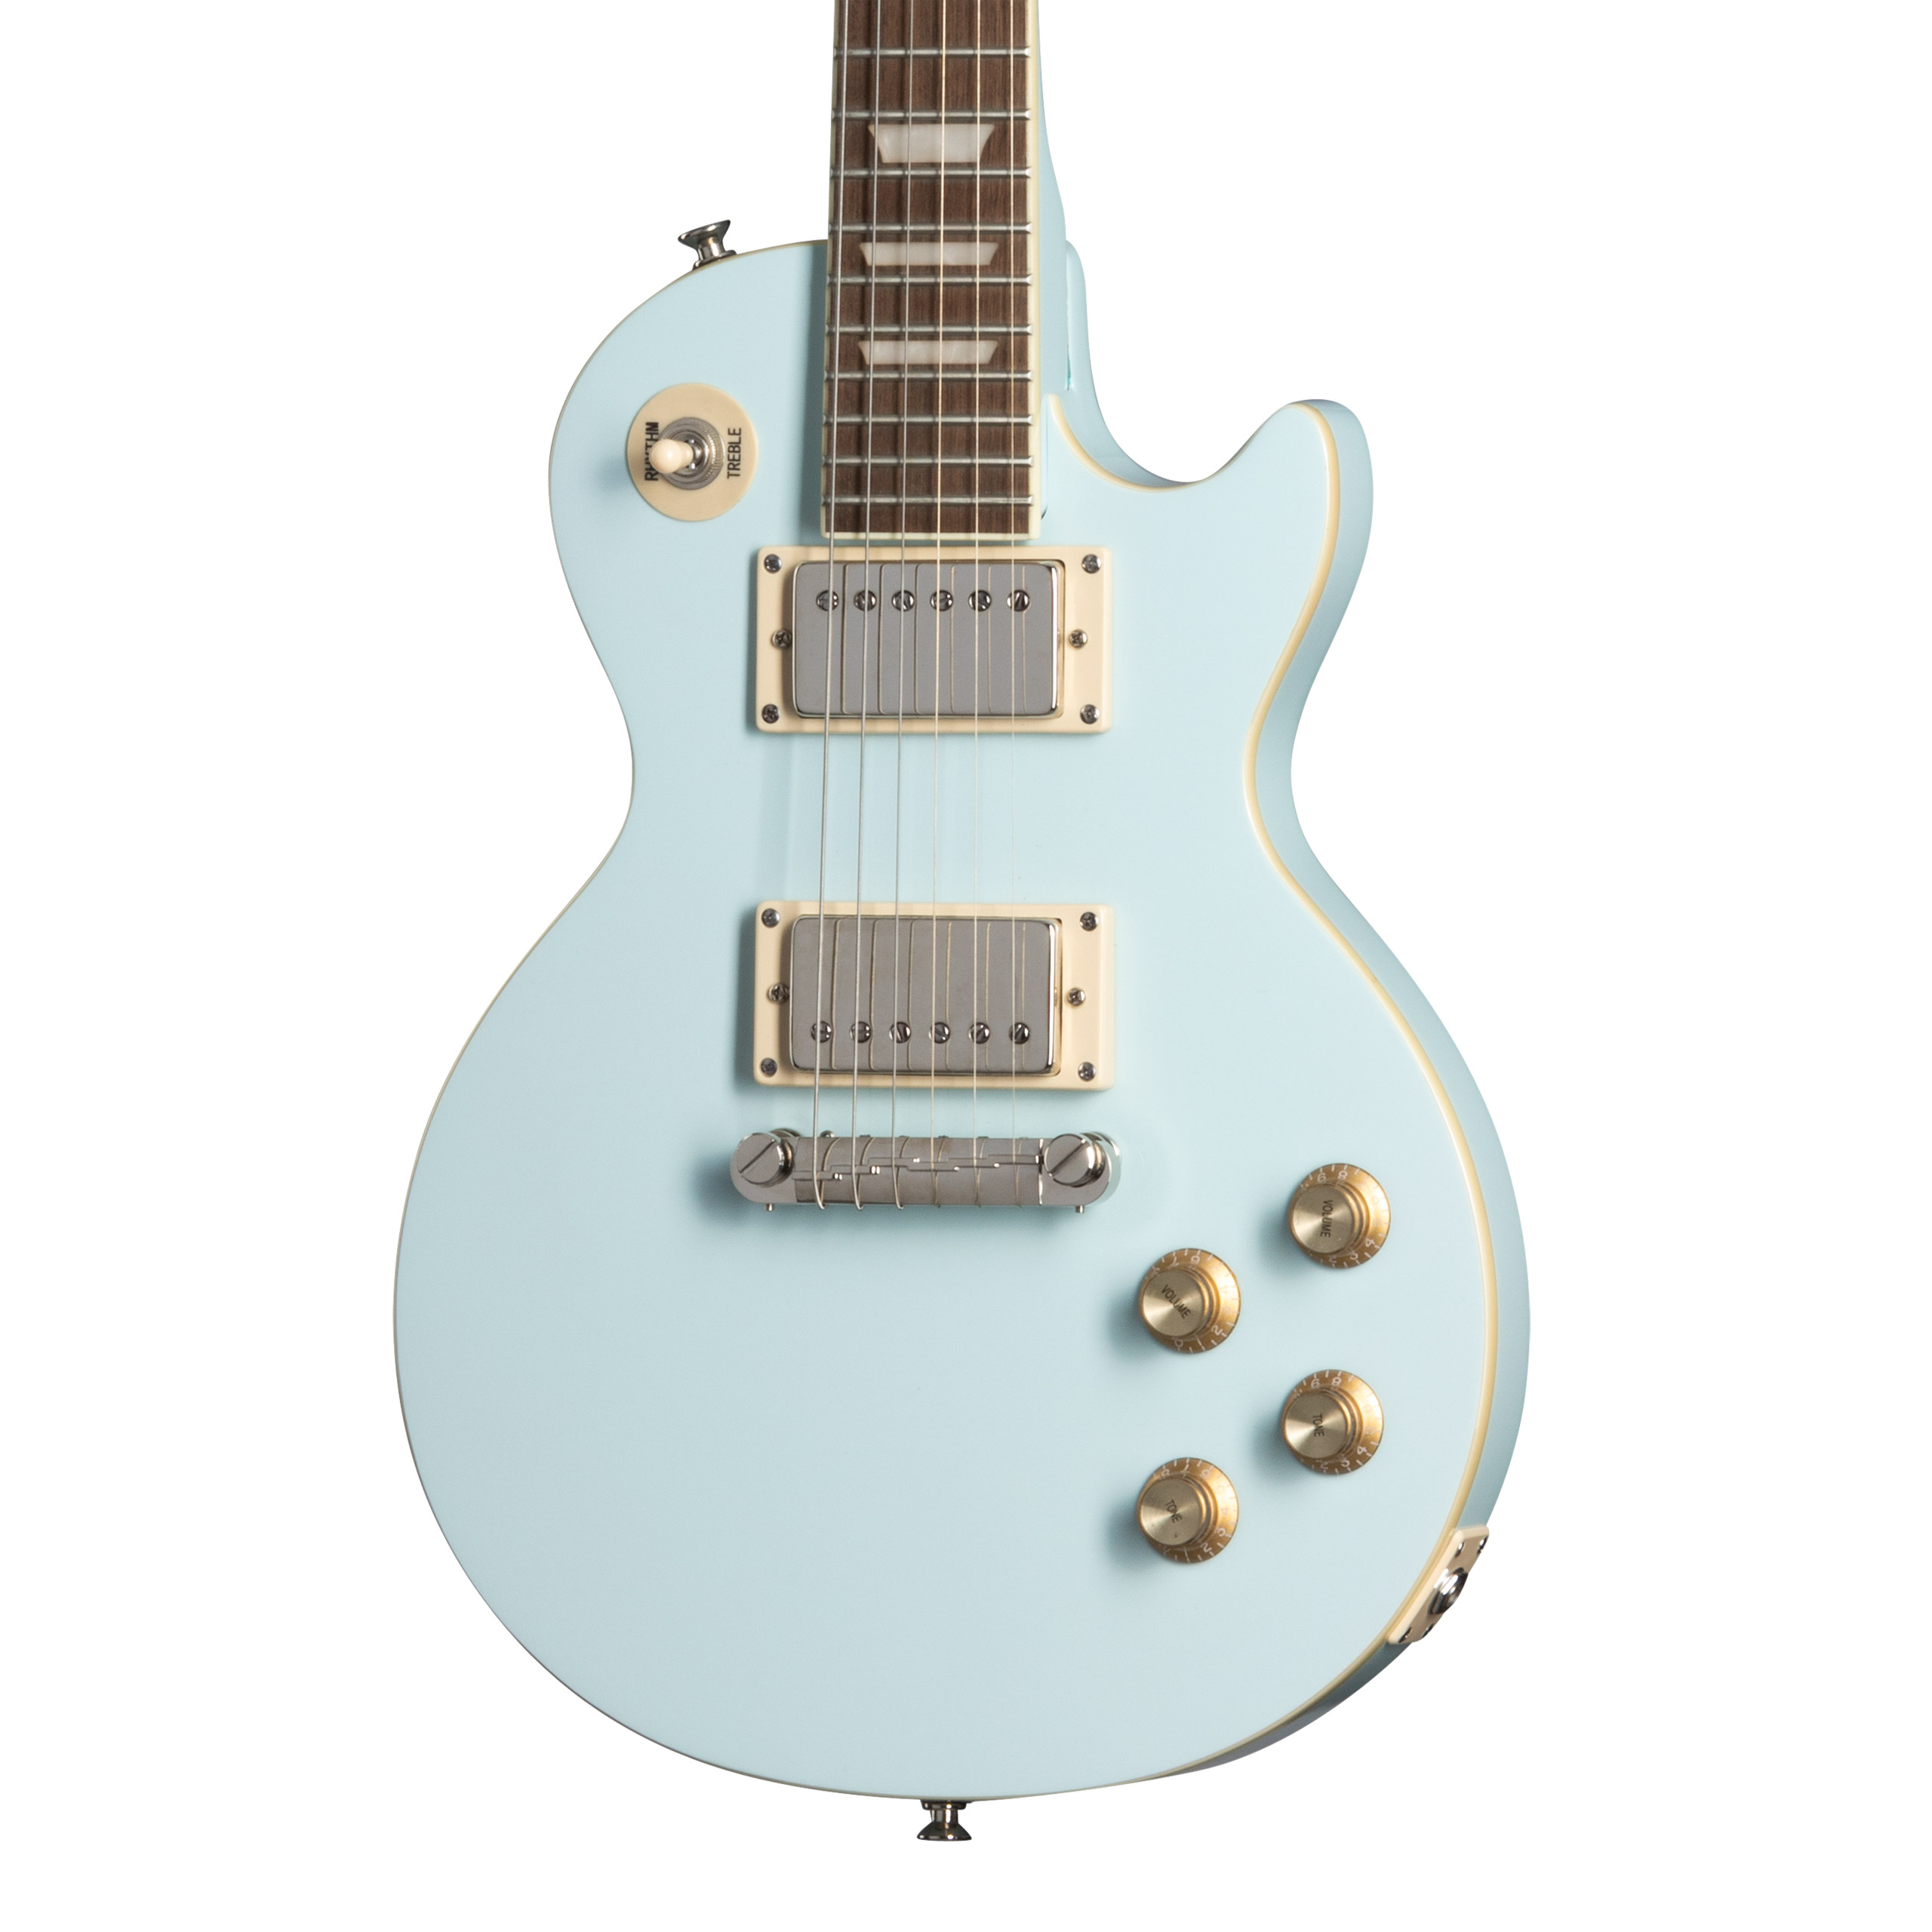 Epiphone Power Players Les Paul (Incl. Gig bag, Cable, Picks), Ice Blue (NEW)